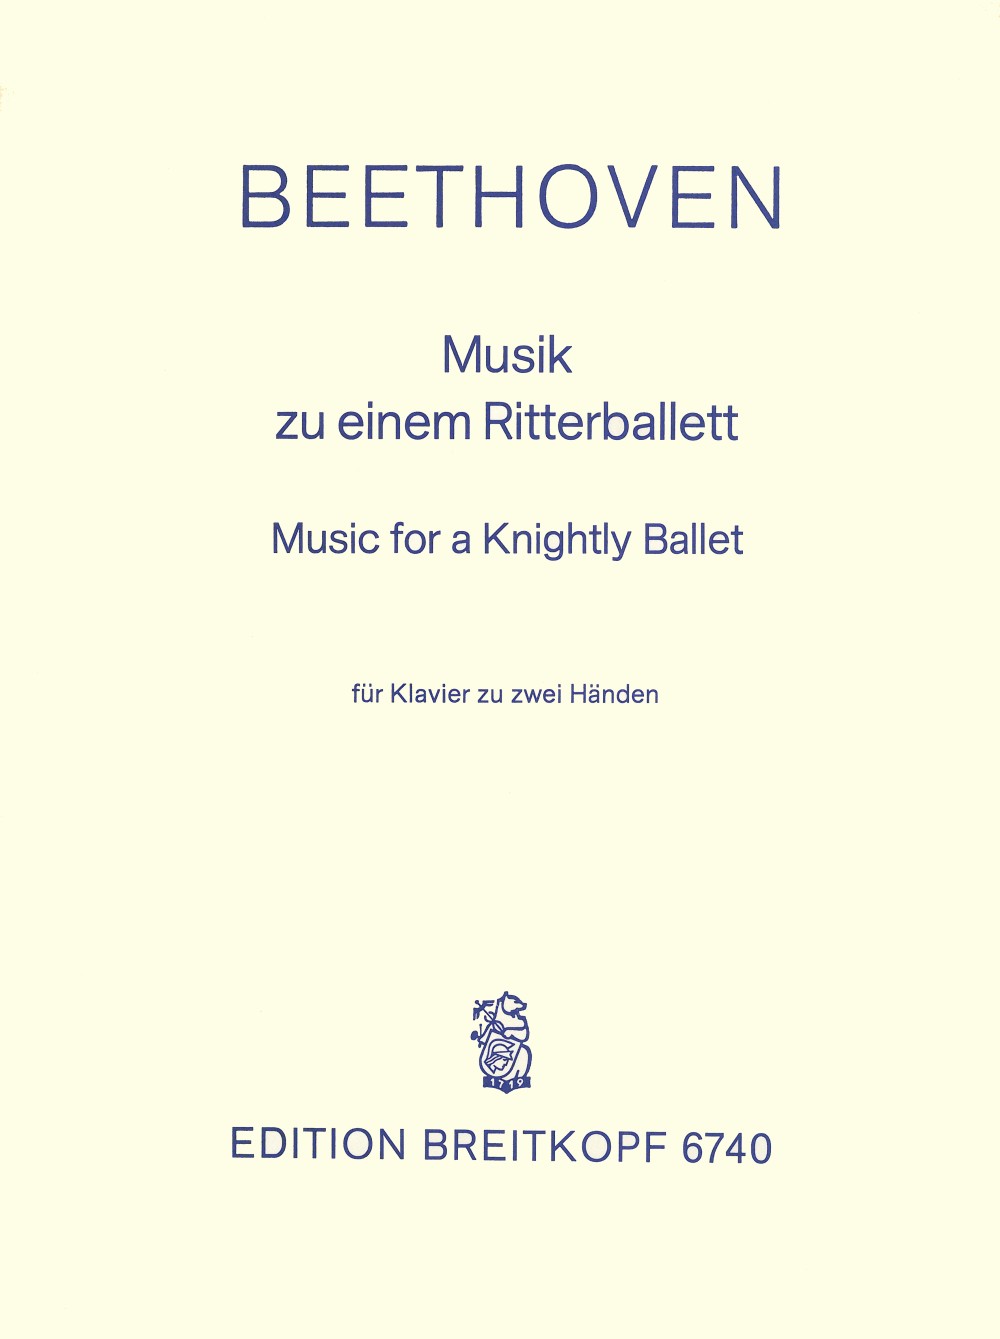 Beethoven: Ritterballet, WoO 1 (arr. for piano)